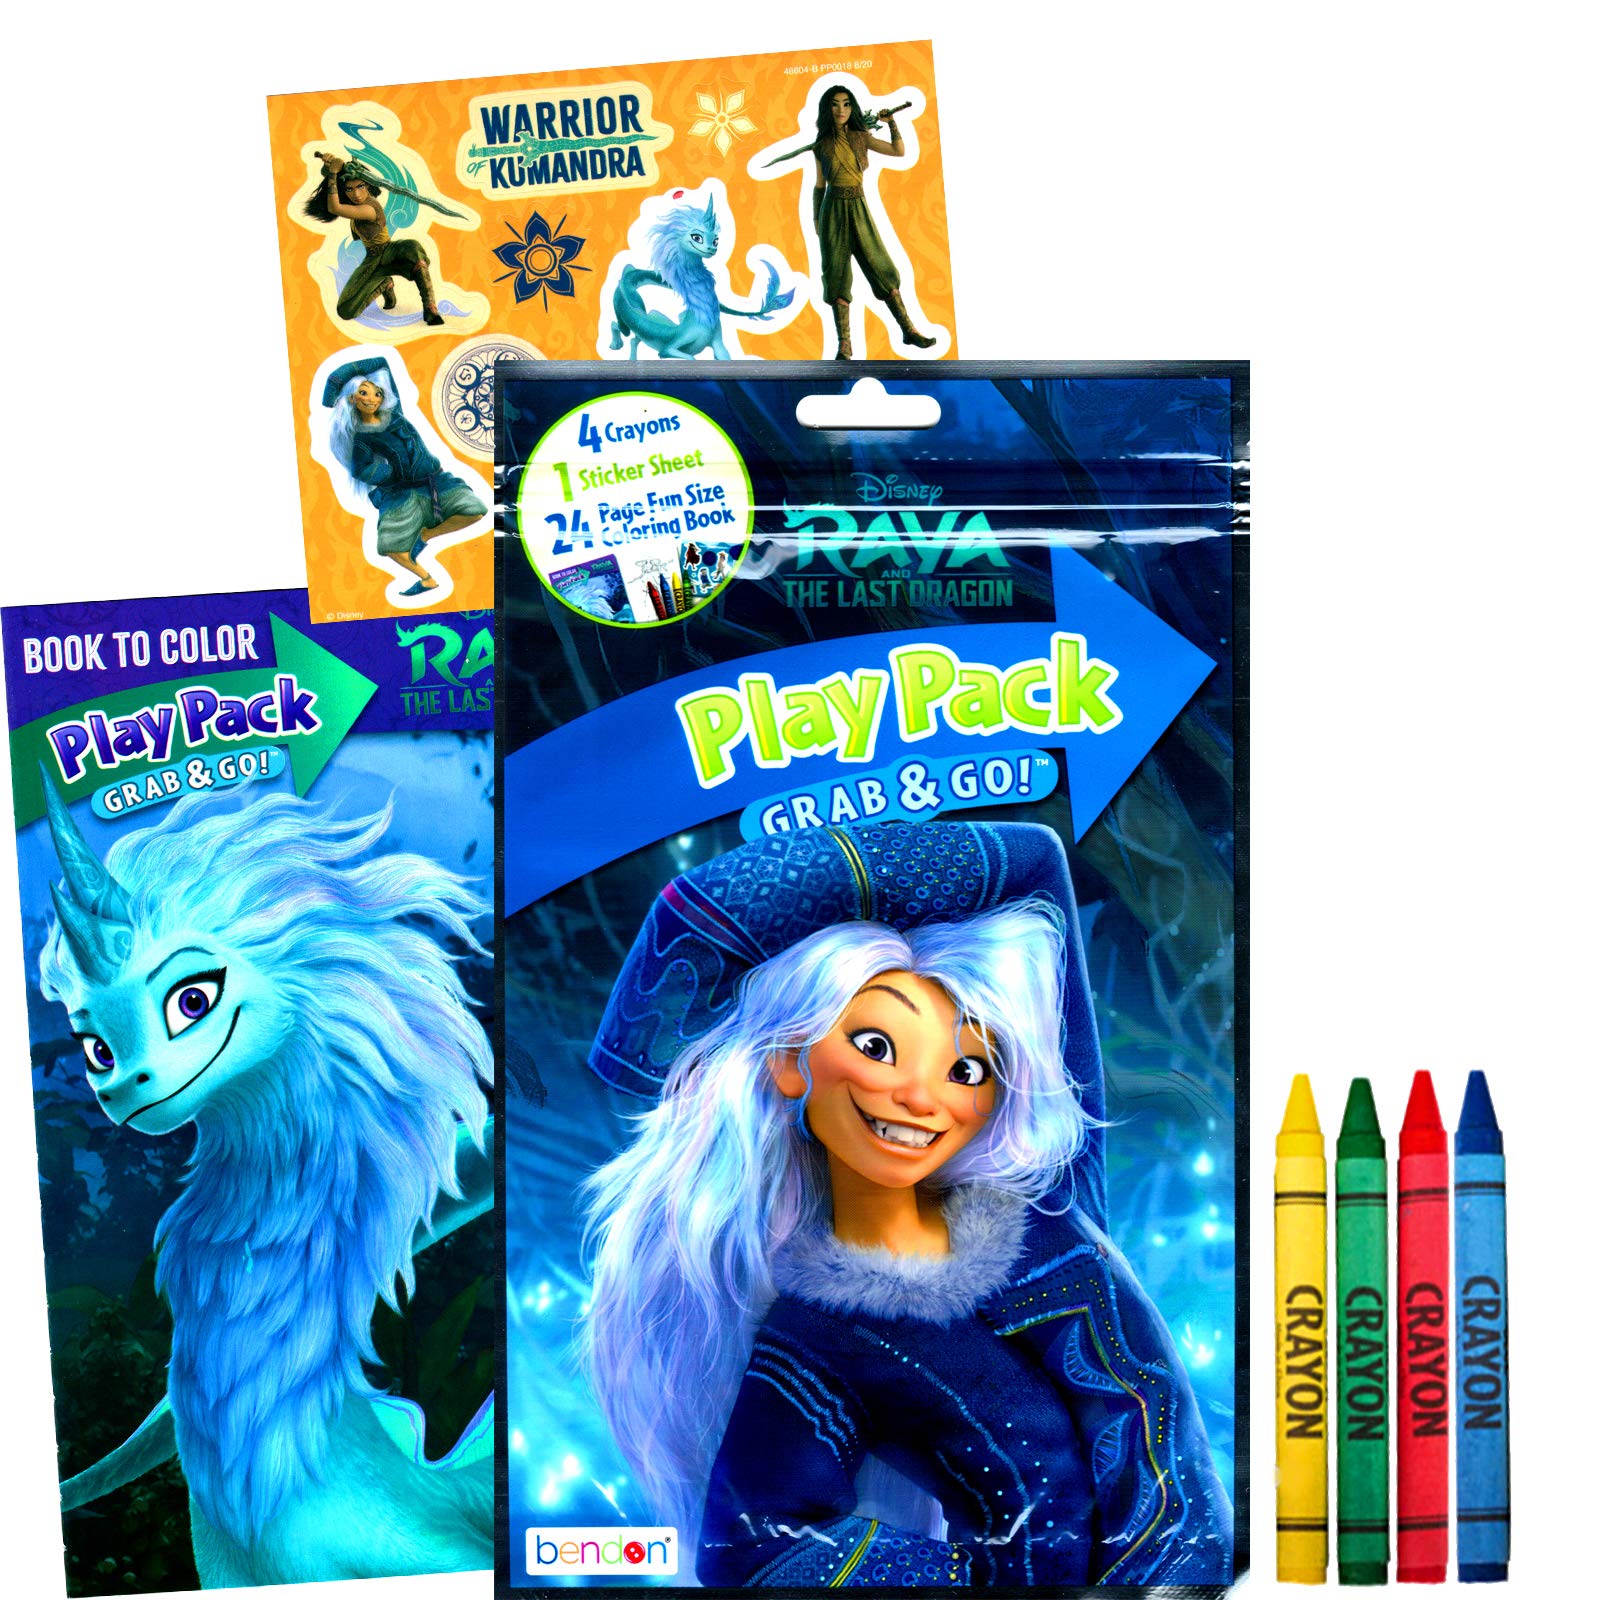 Disney Princess Coloring Book Set for Kids - Activities, Stickers and Games - Featuring Disney Princess, Frozen, Moana and Raya and The Last Dragon